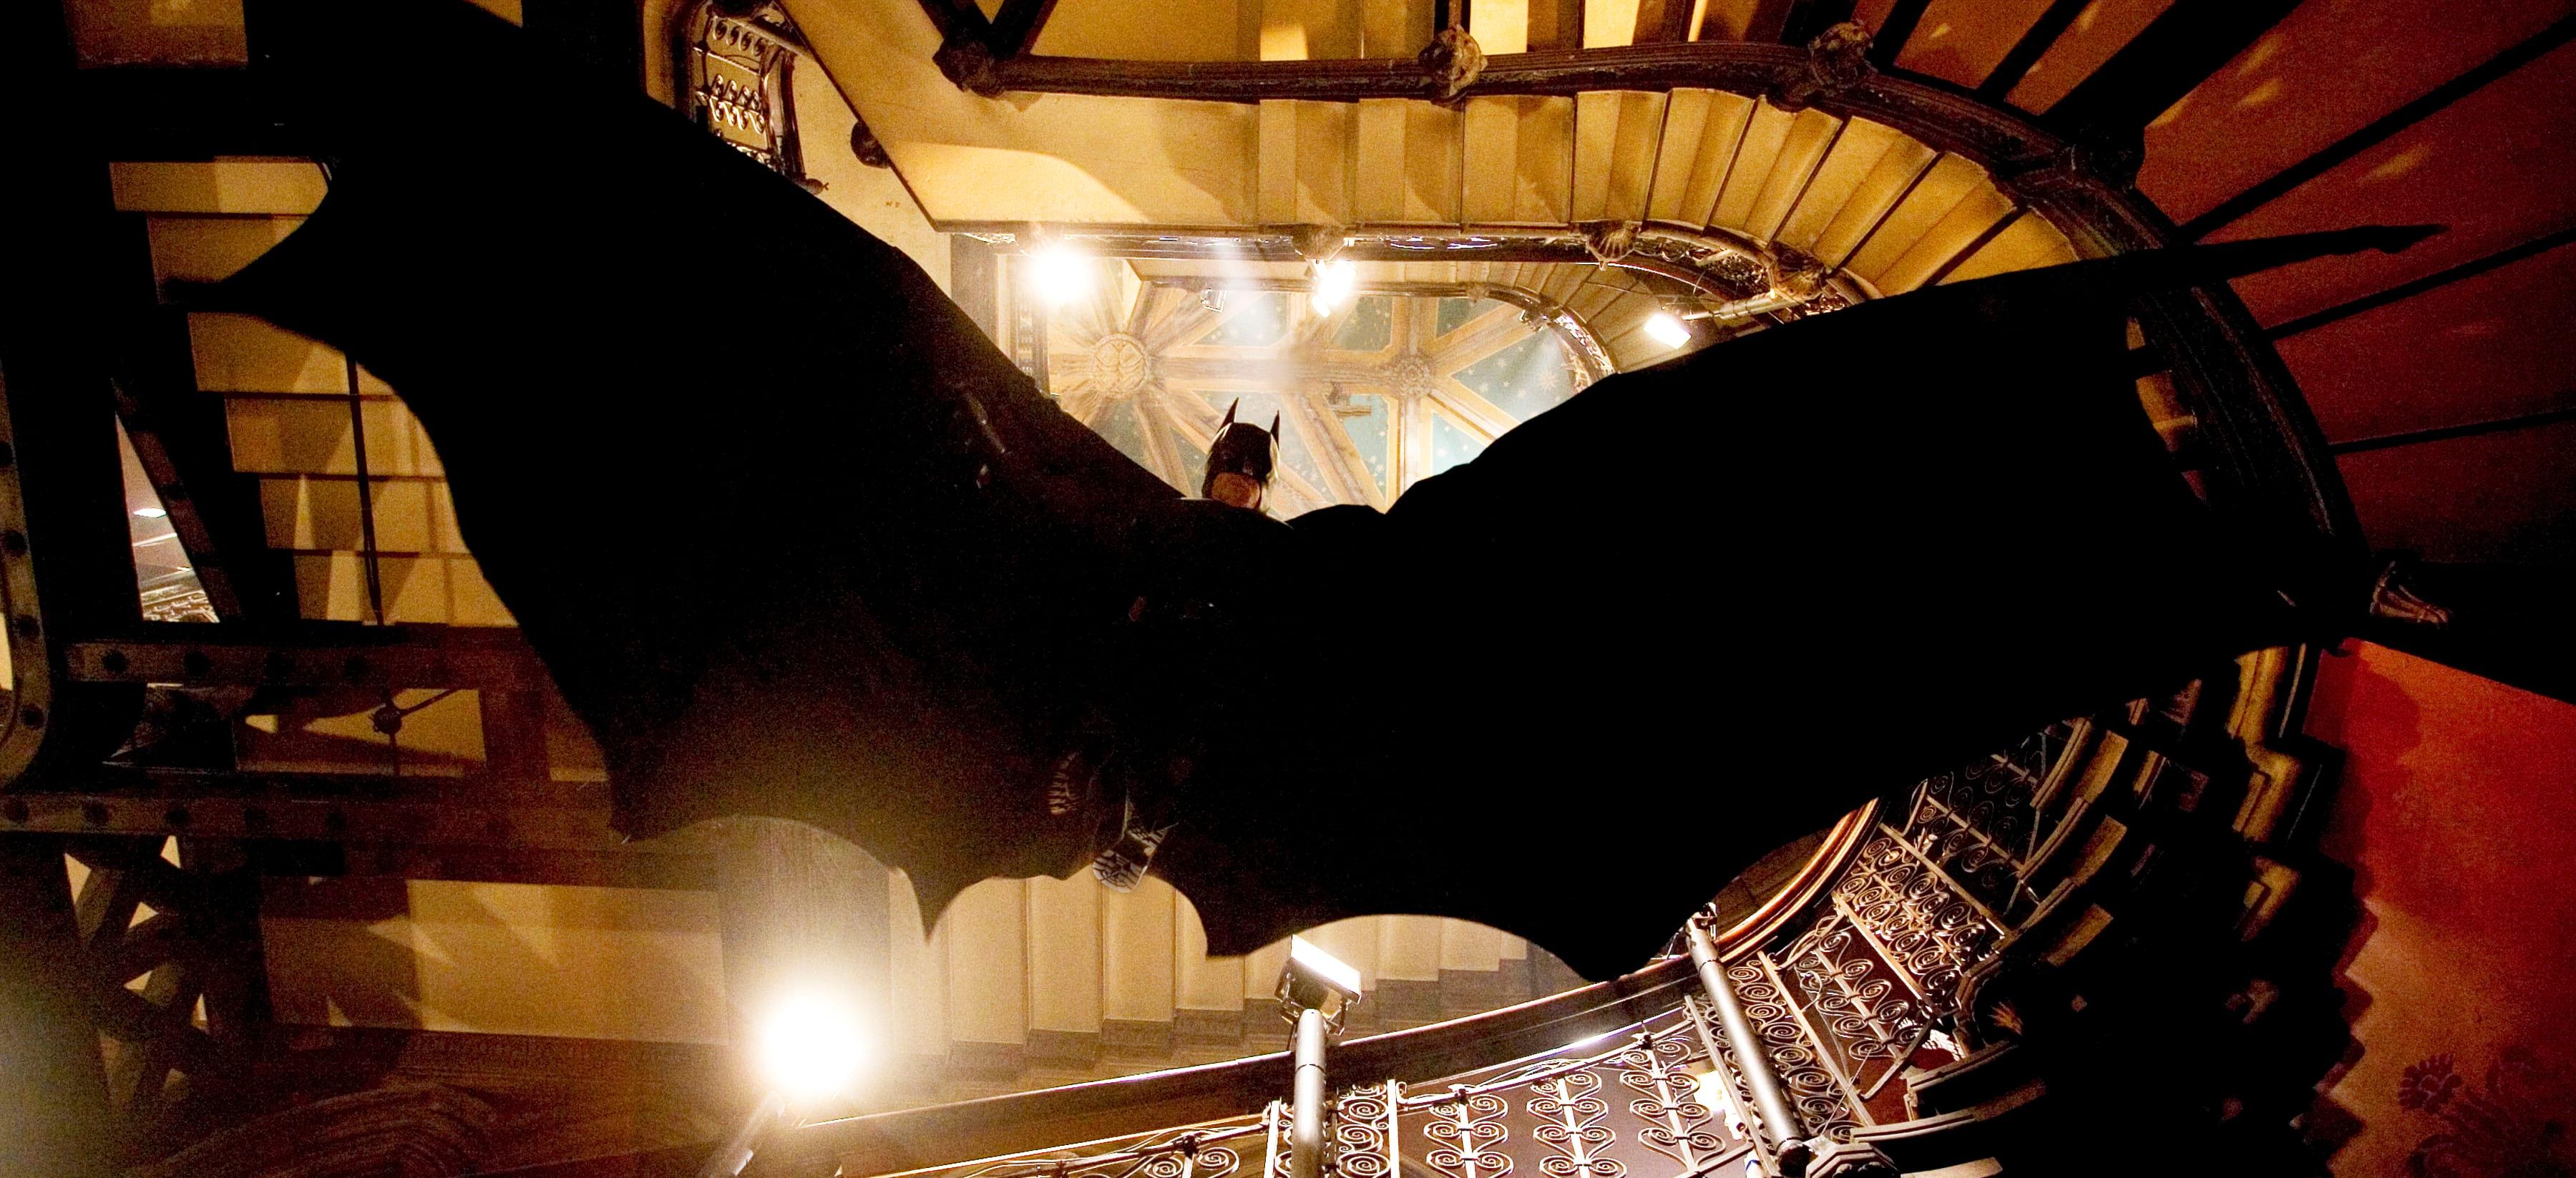 Batman Begins: The Bat Takes Wing American Society of Cinematographers